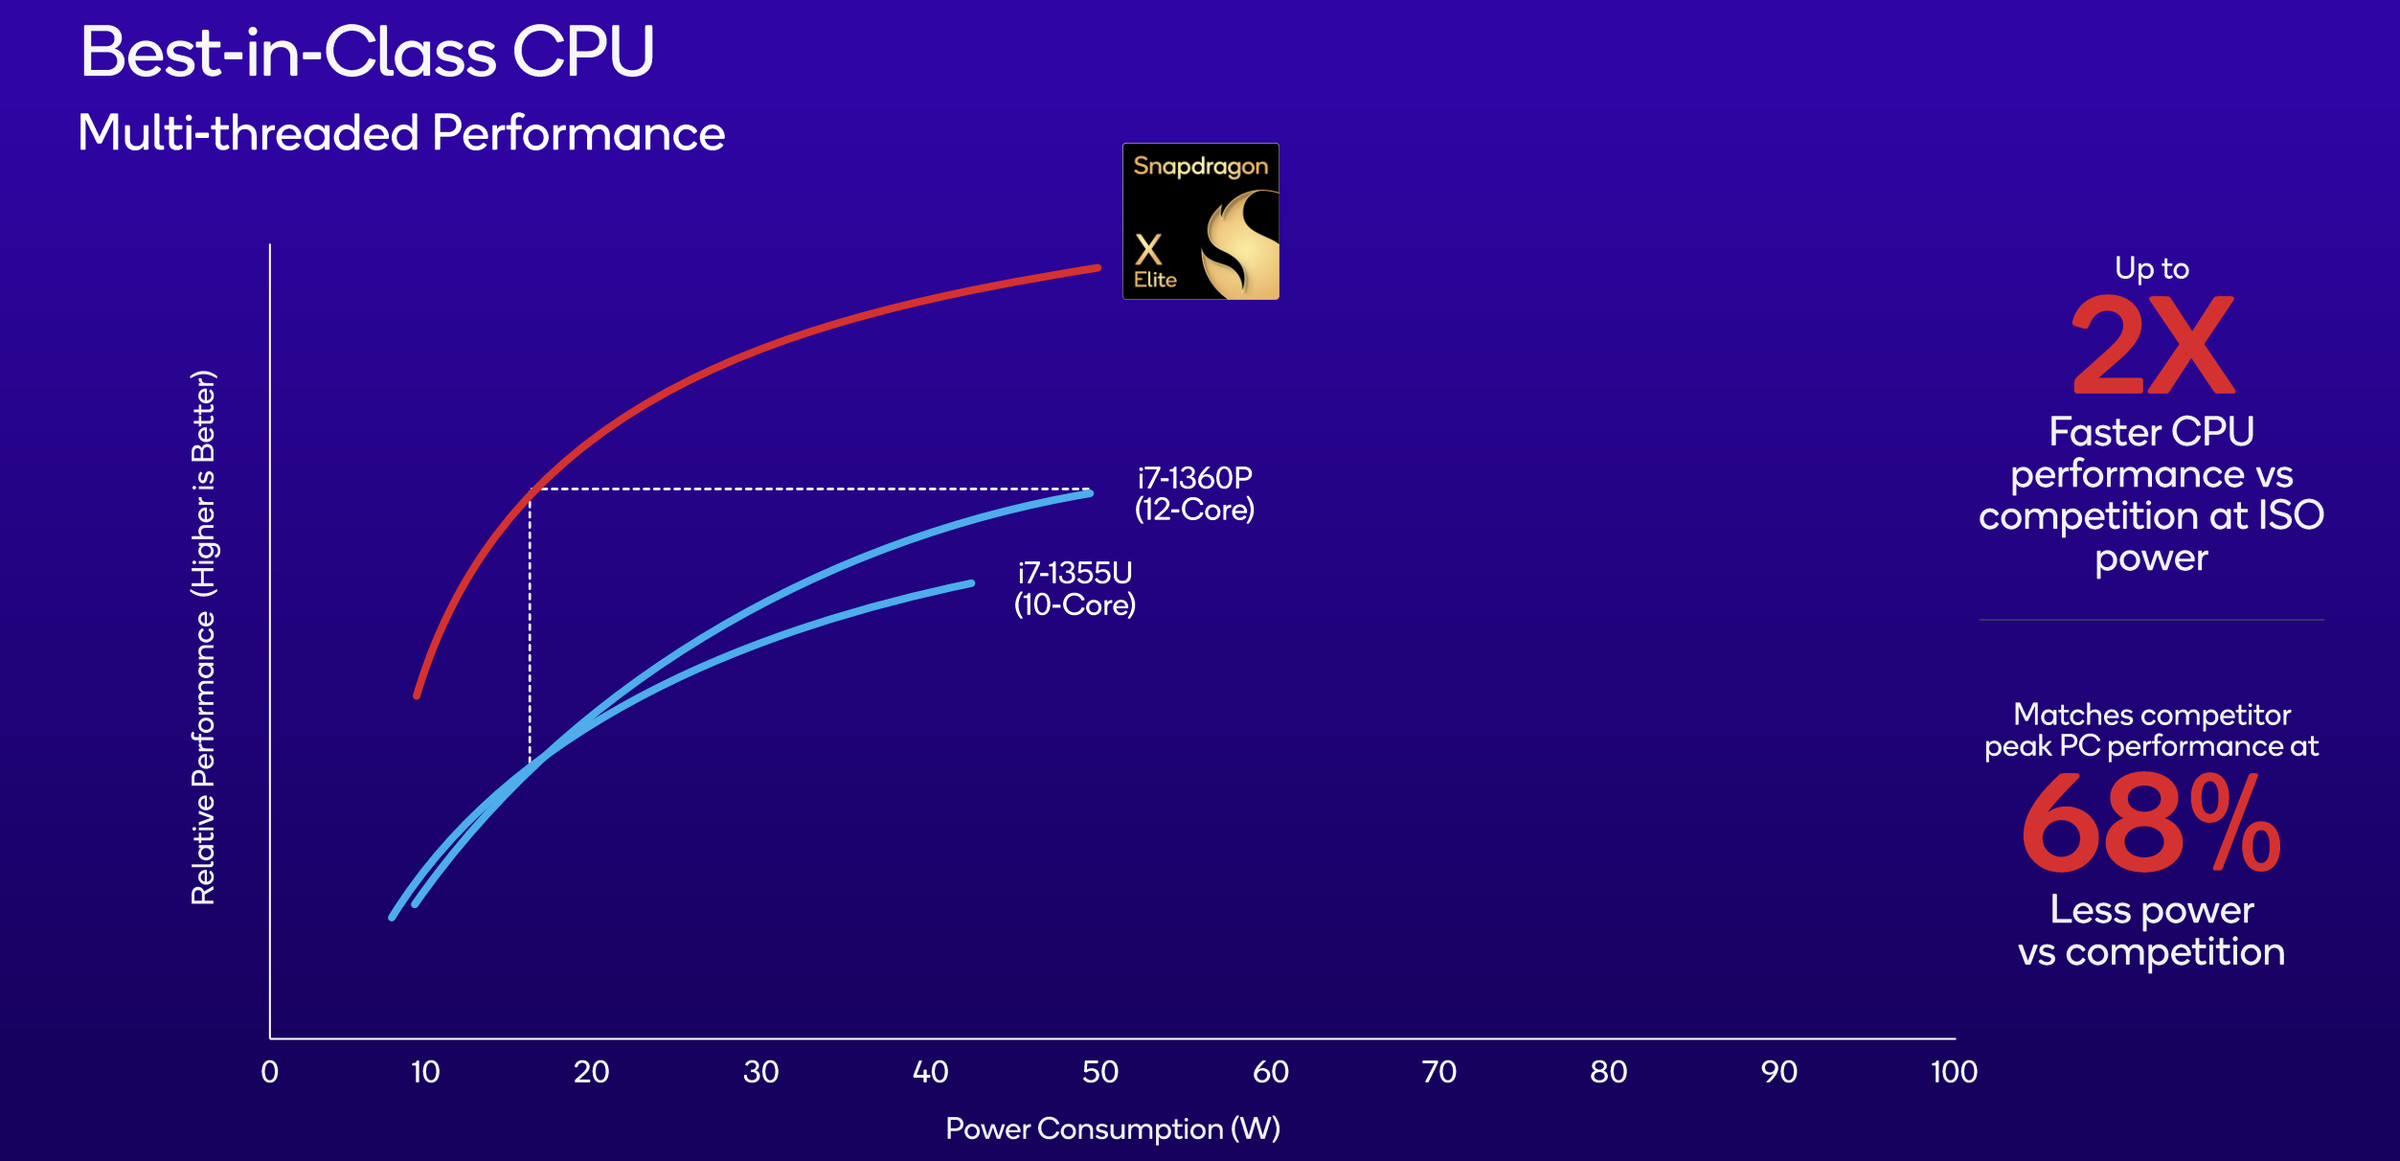 A chart that shows “Best in Class CPU multi-threaded performance. Up to 2X Faster CPU performance vs competition at ISO power. Matches competitor peak PC performance at 68 percent less power vs competition.”